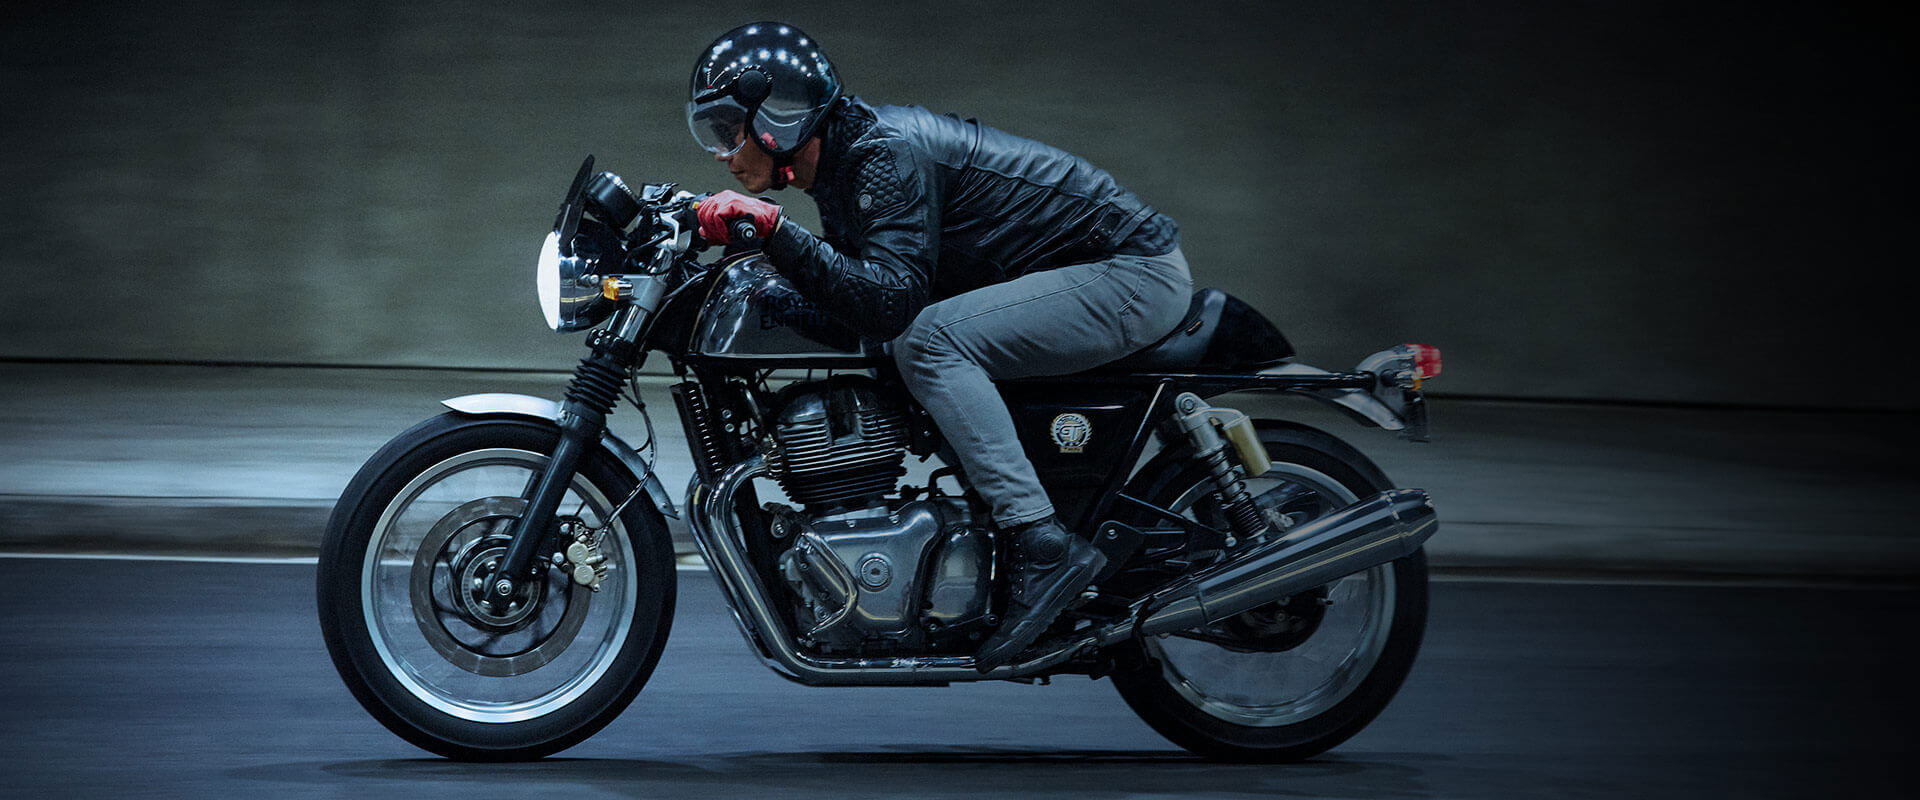 Royal Enfield Continental GT Motorcycle Commercial Production